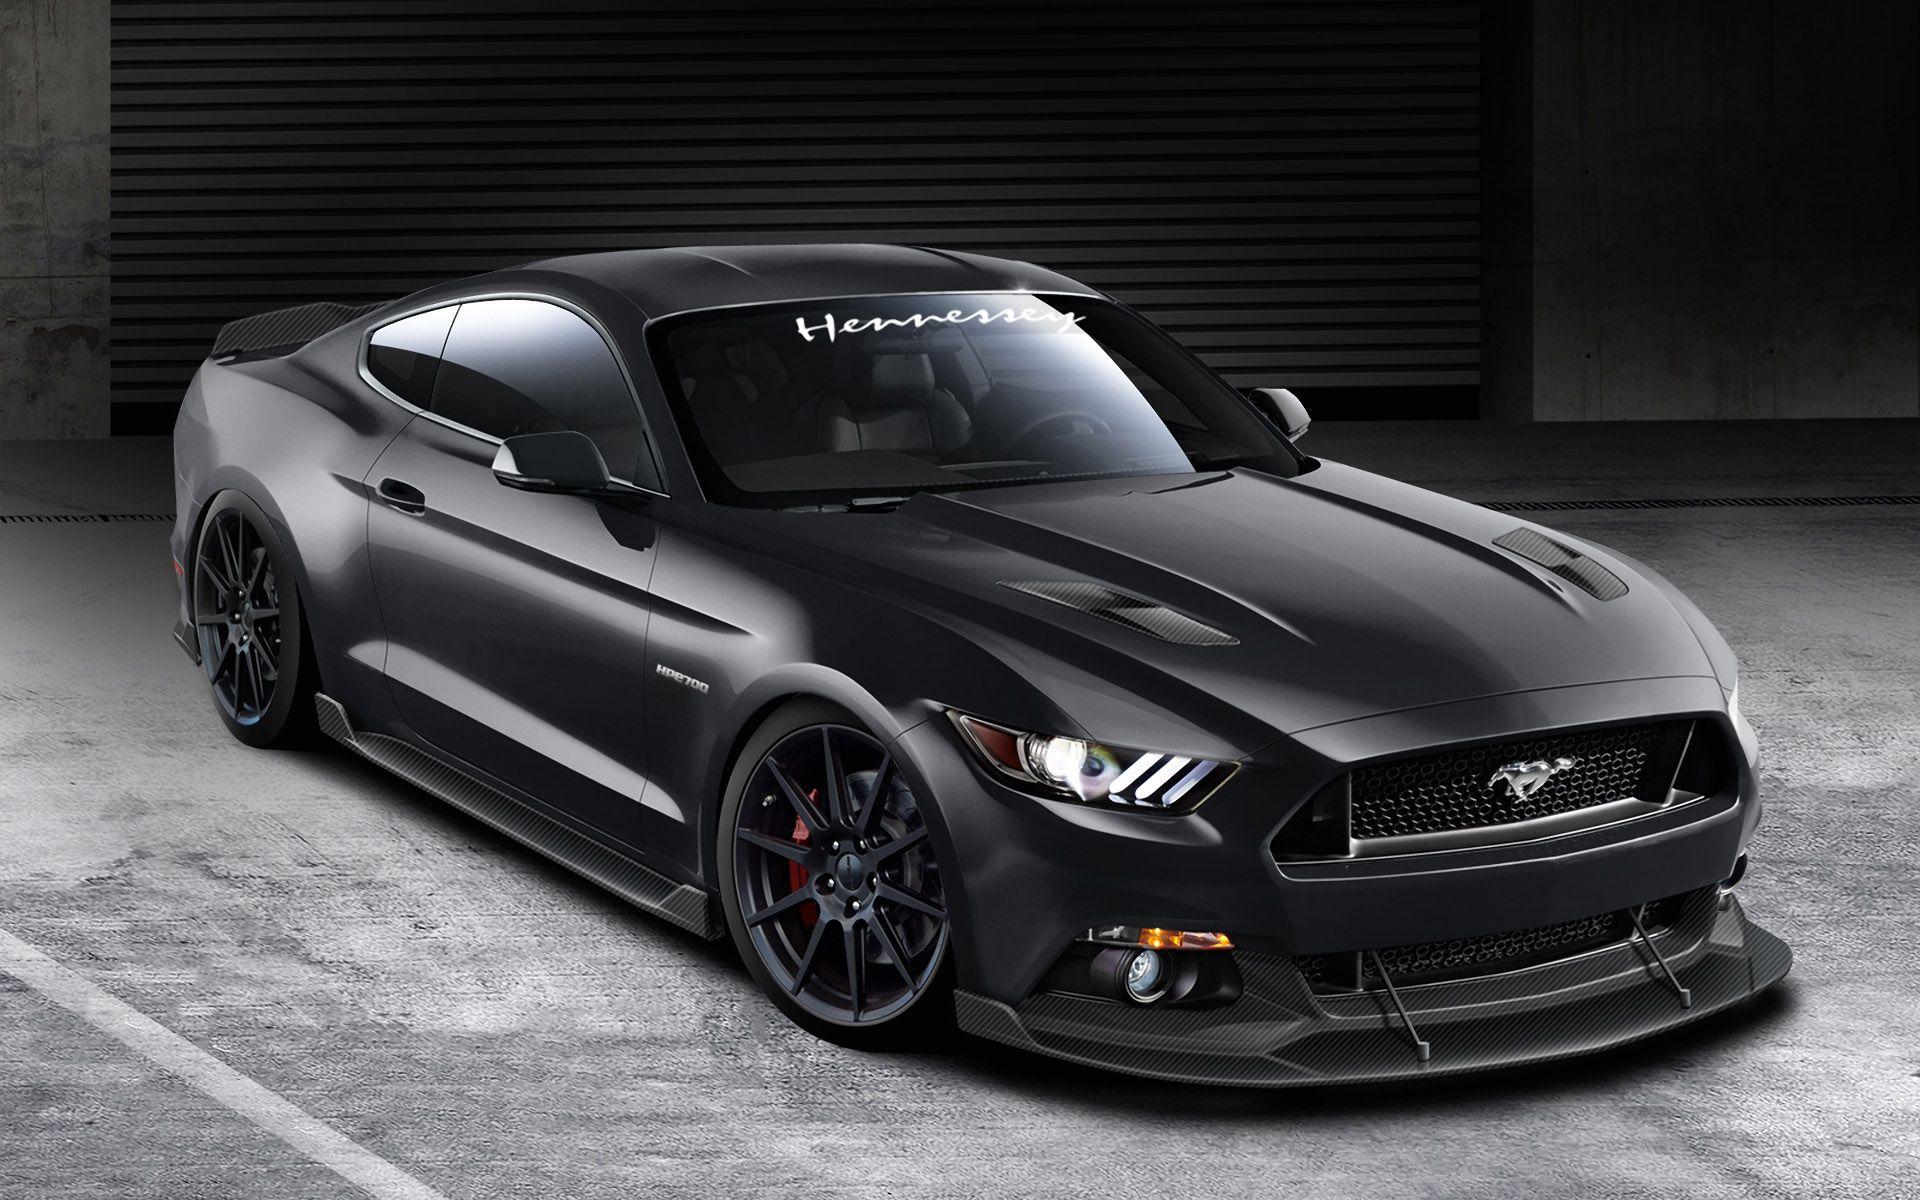 Hennessey Ford Mustang HPE700 Wallpaper Wide or HD. Cars